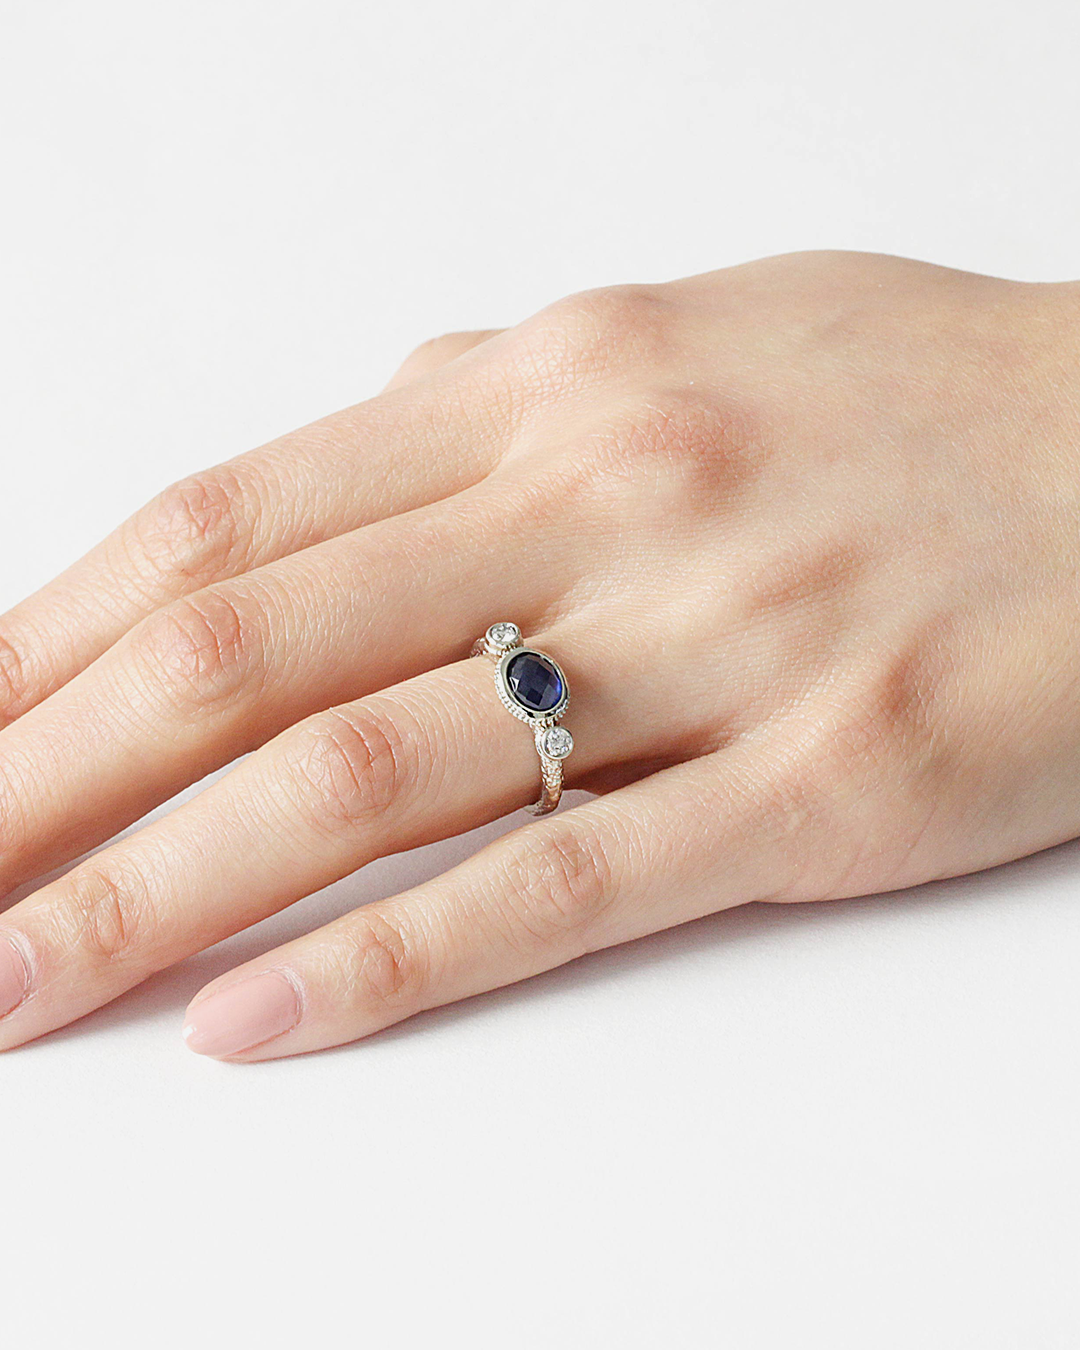 Alex Ring / Sapphire + Diamonds By fitzgerald jewelry in Engagement Rings Category